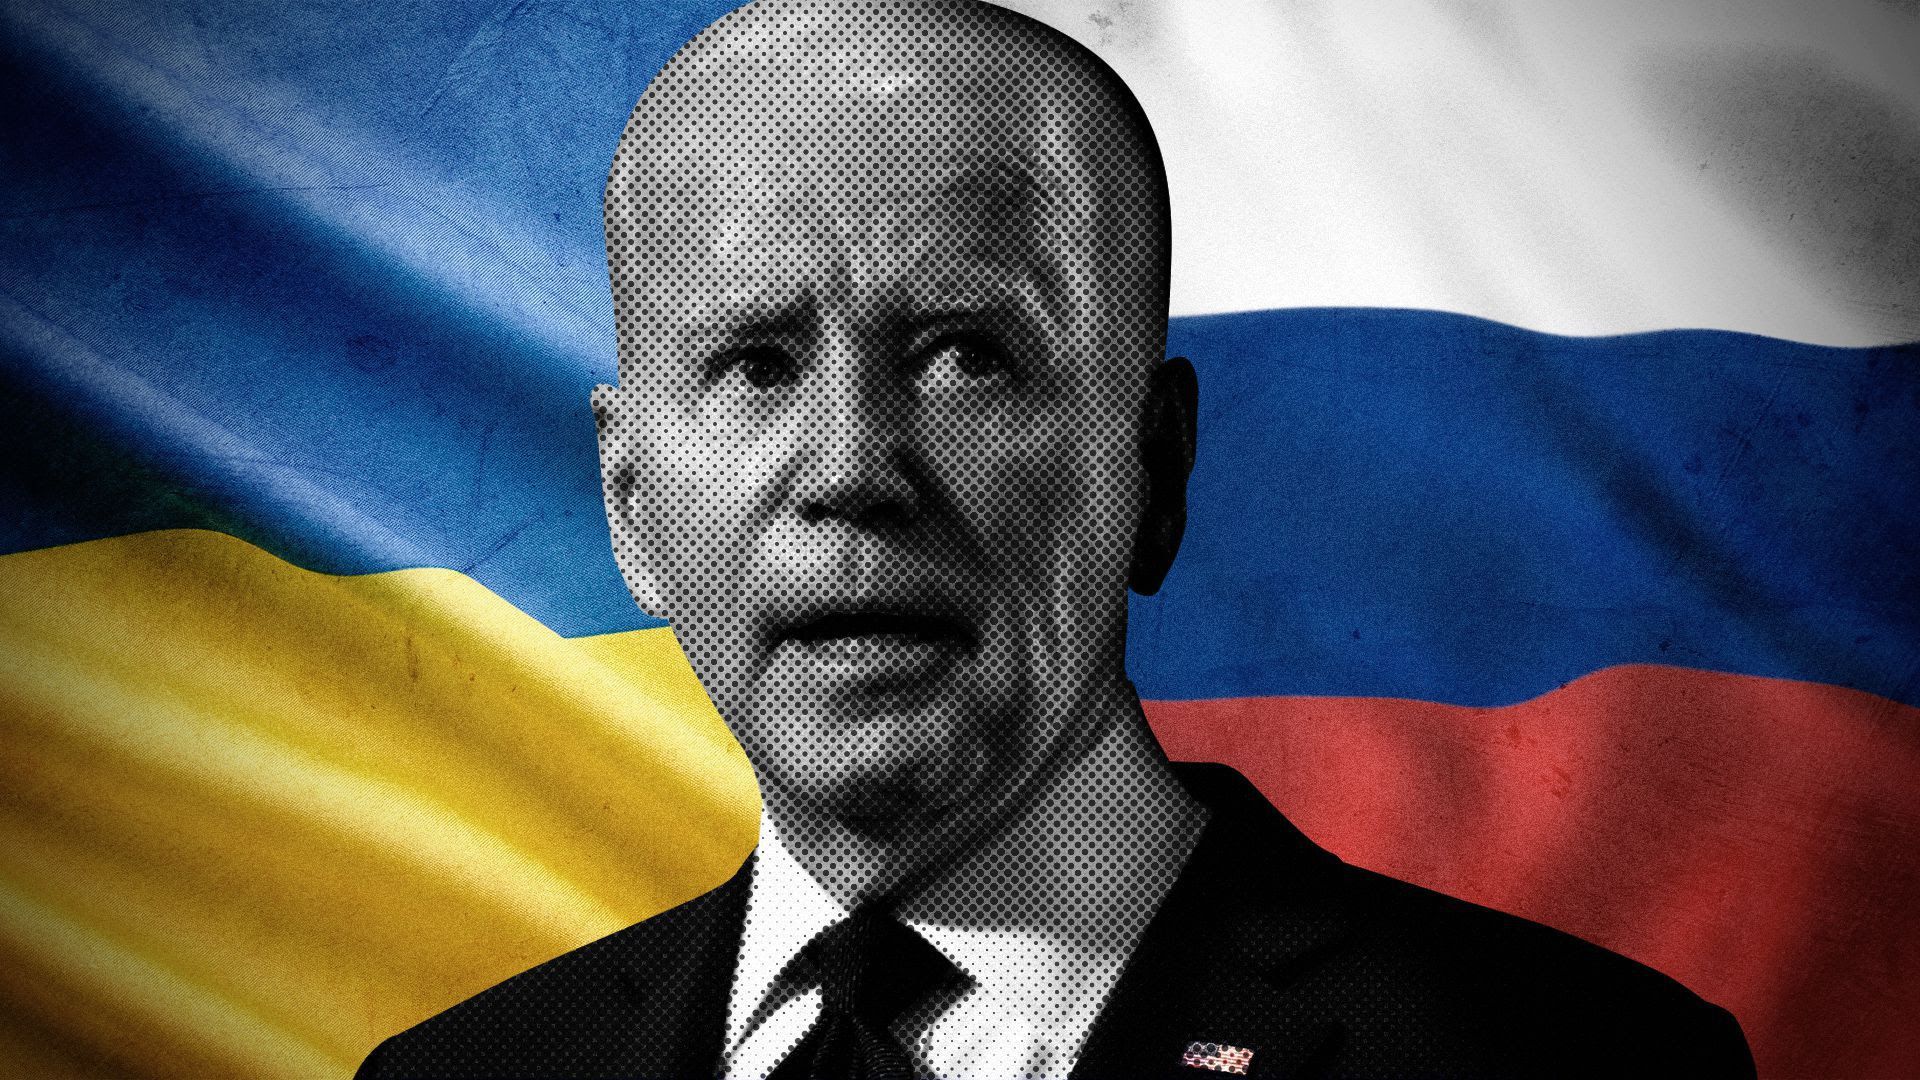 Biden illustrated against Ukrainian and Russian flags